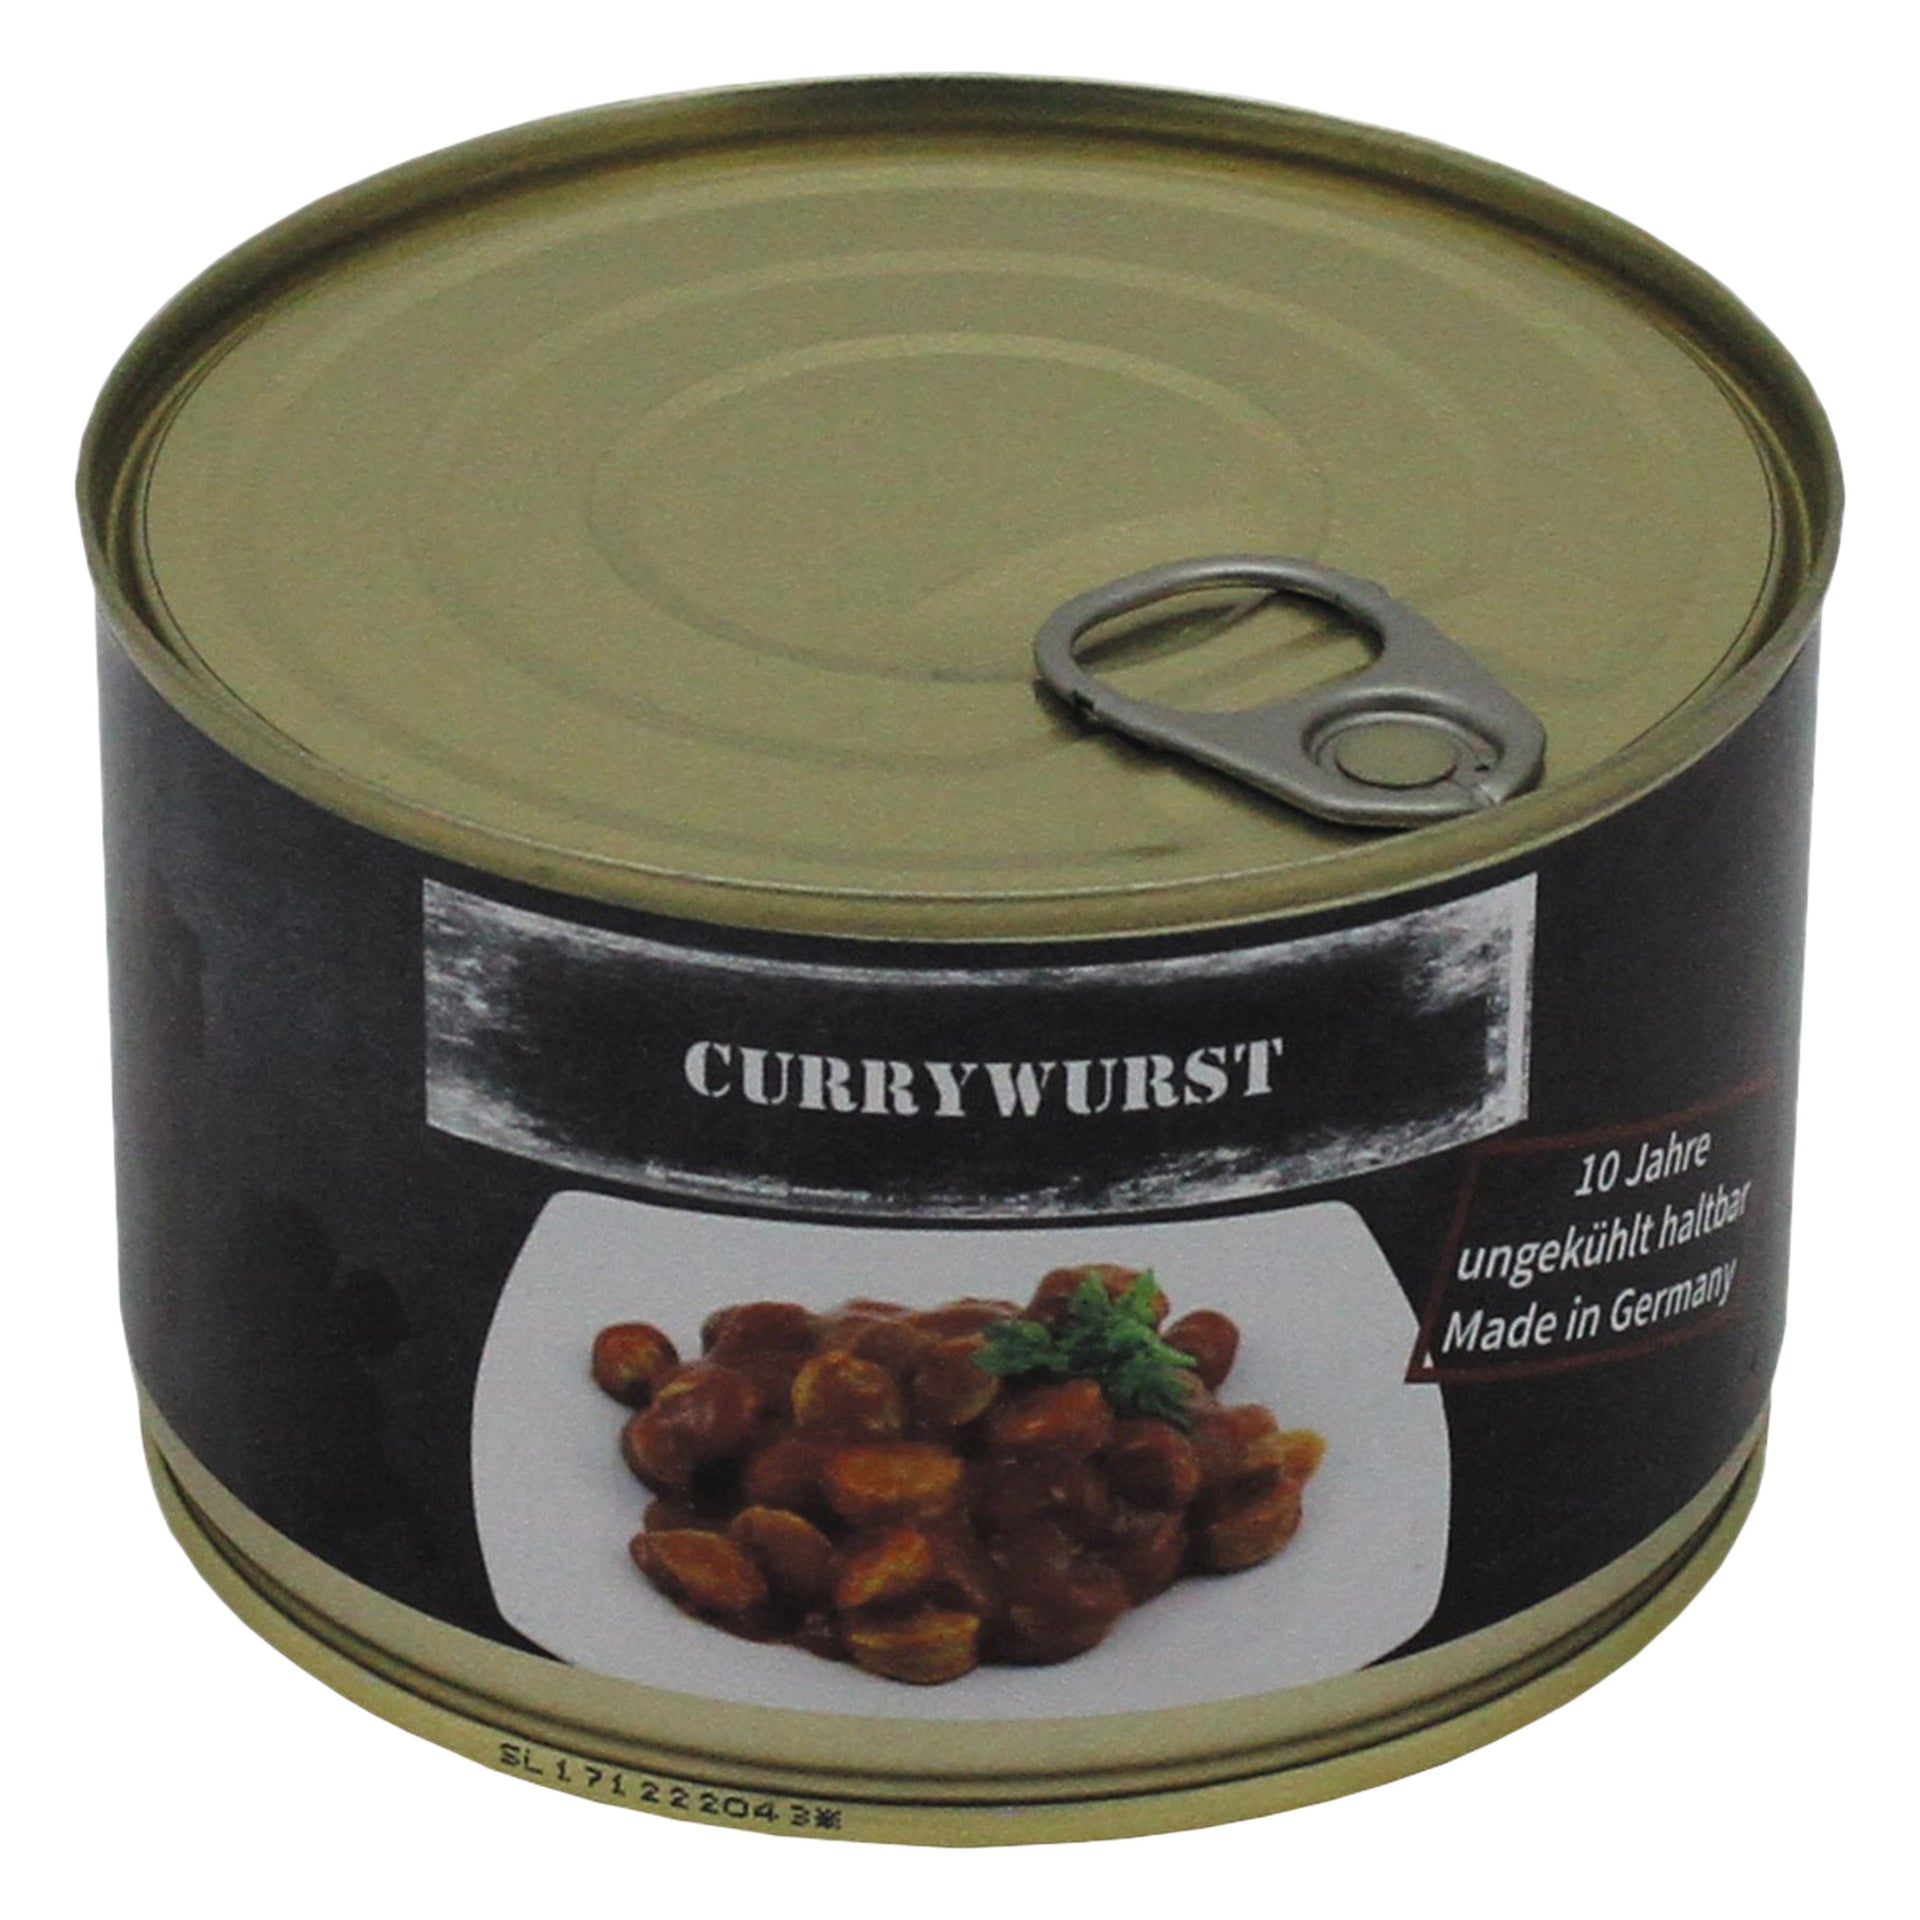 Sausage in Curry Sauce Canned 400 g